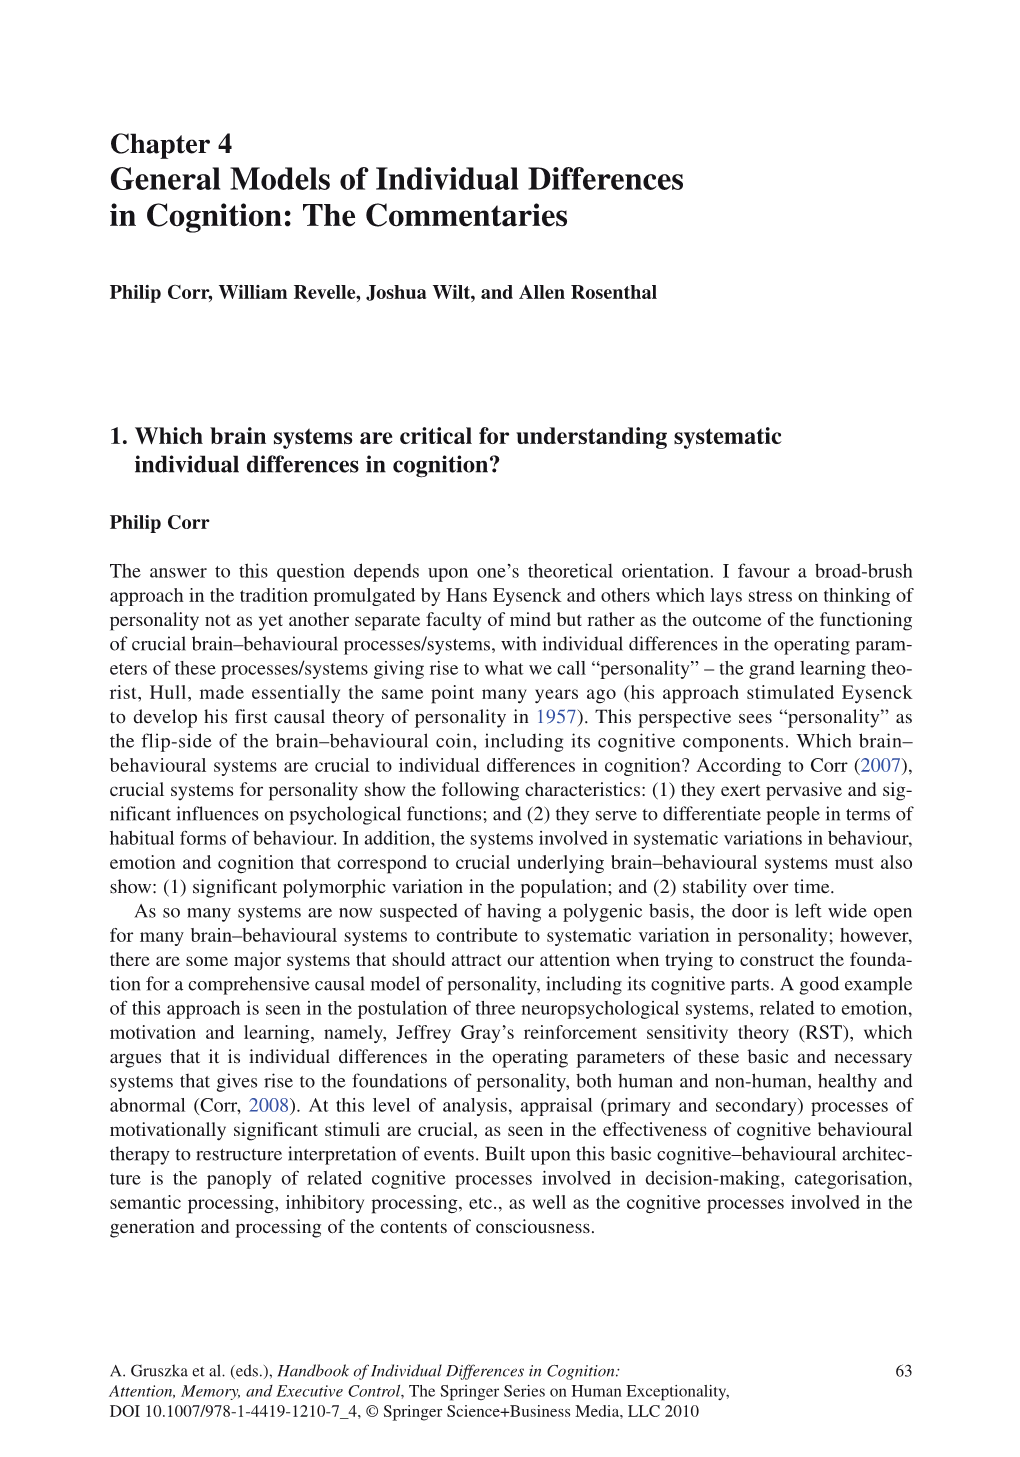 General Models of Individual Differences in Cognition: the Commentaries